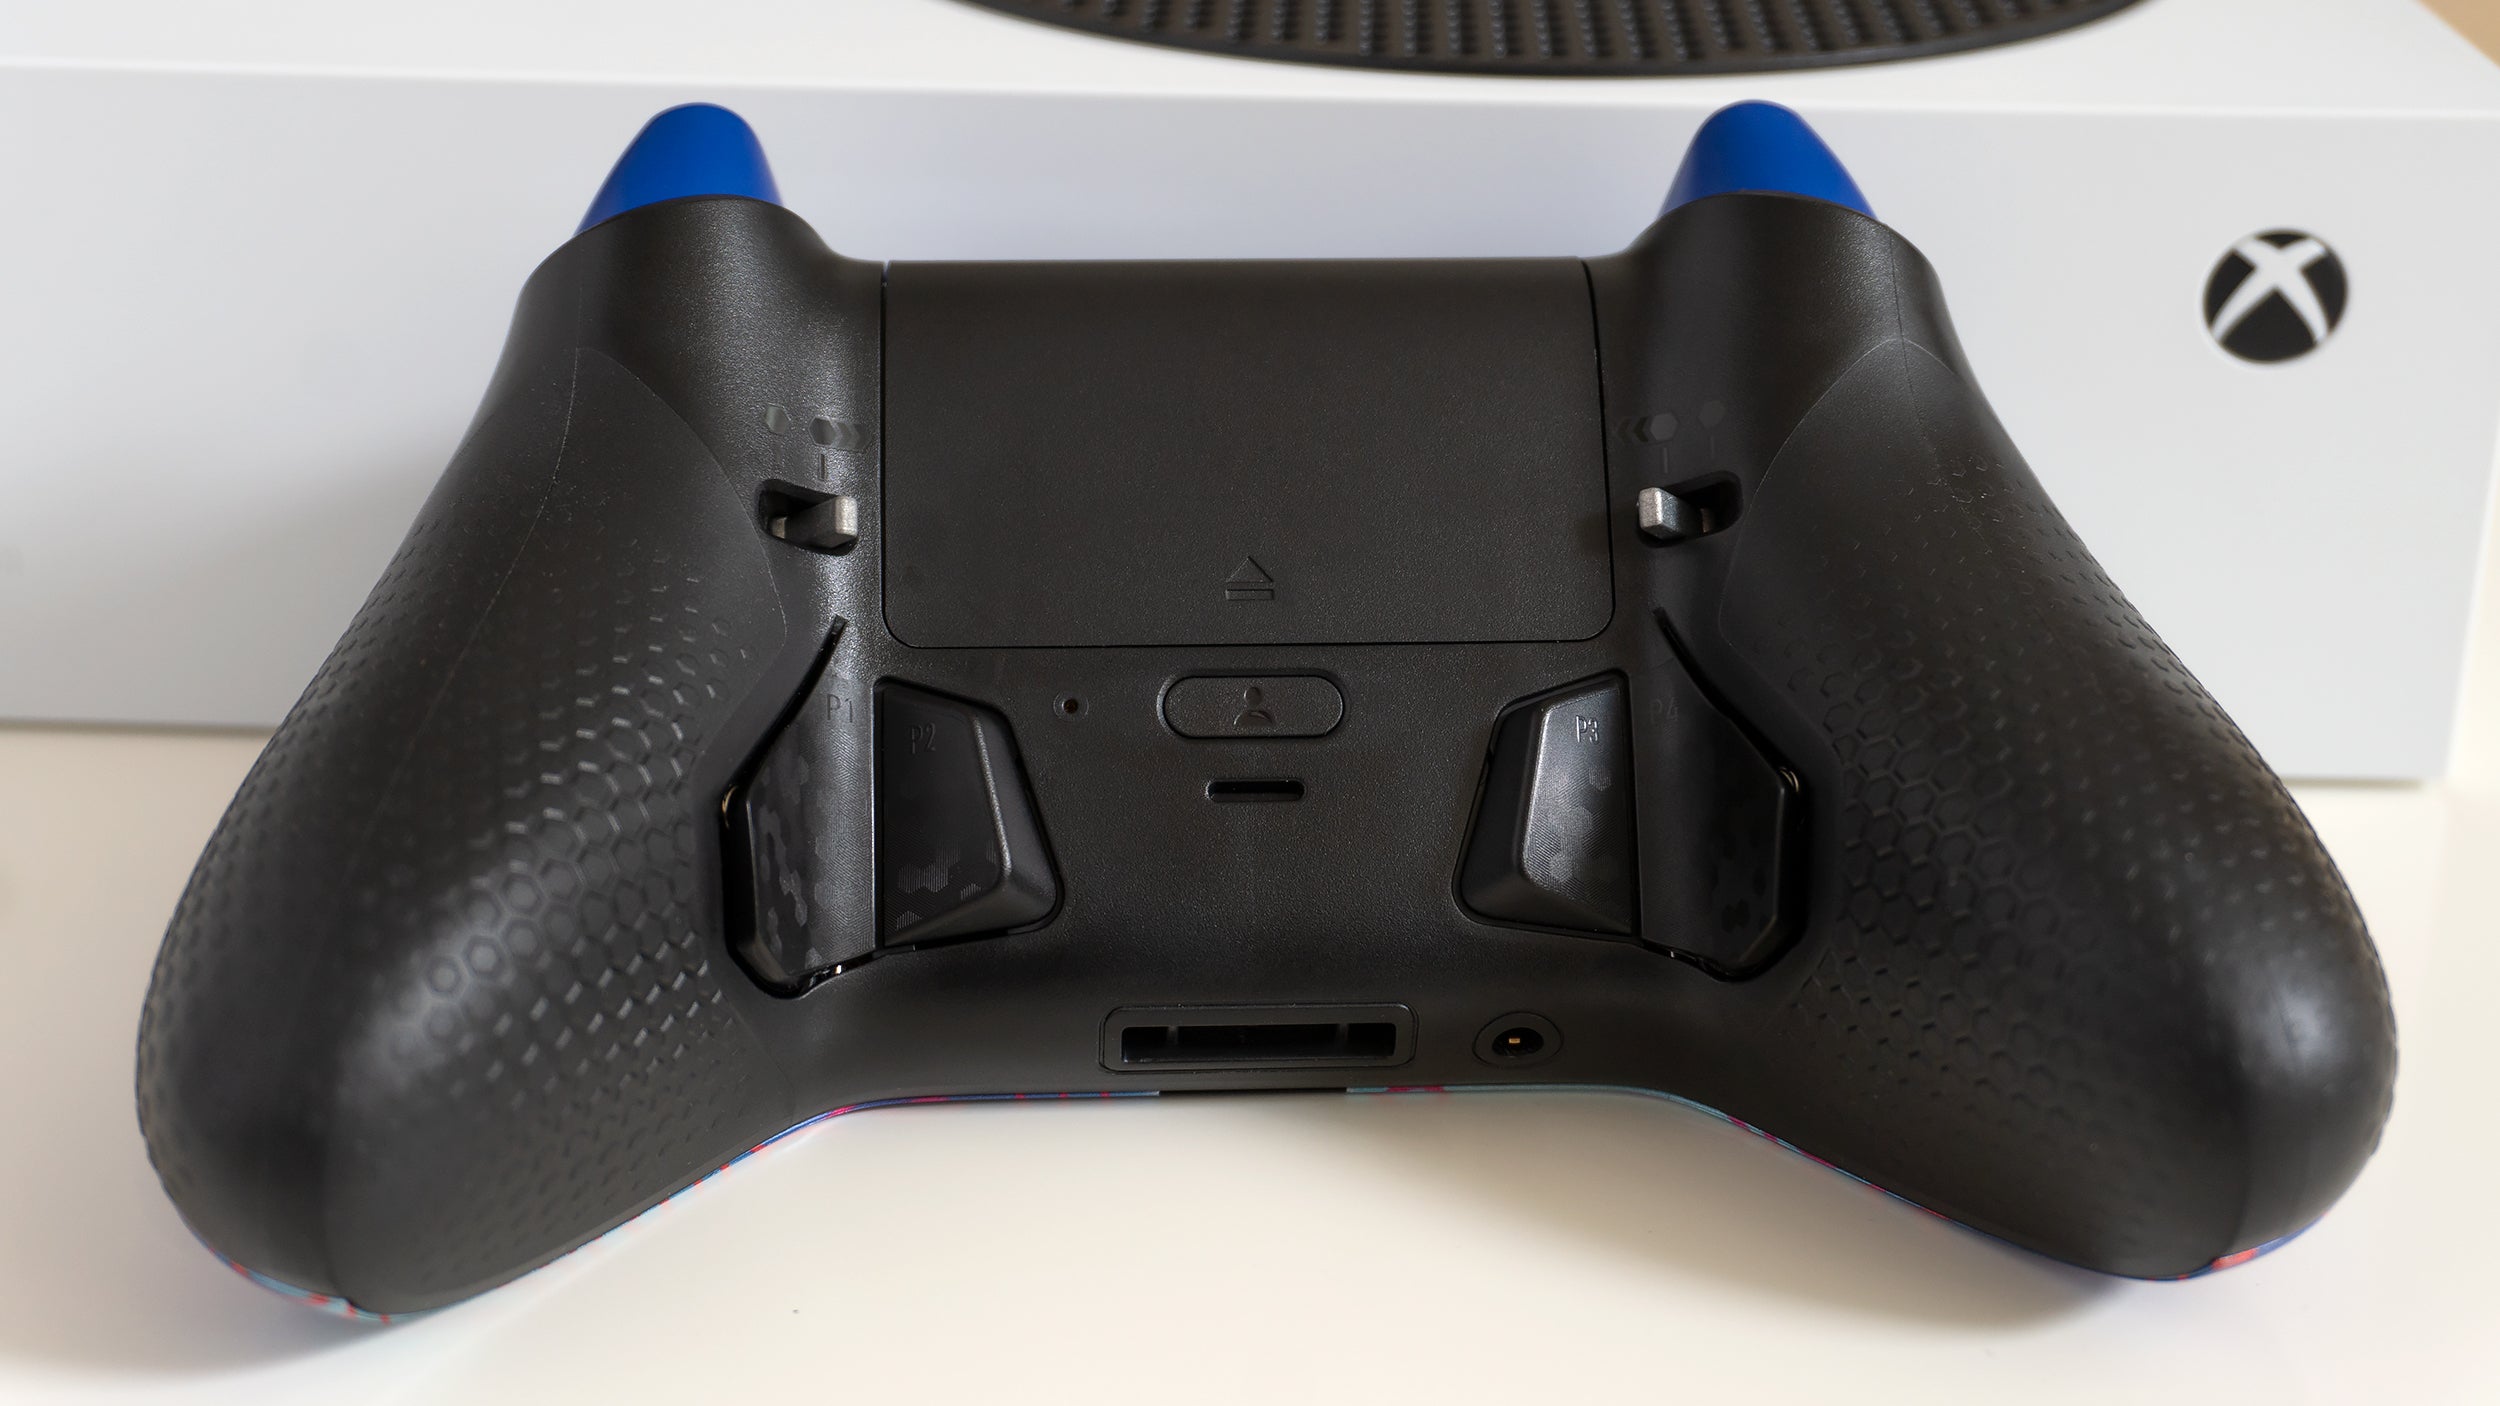 Instead of longer paddles, the Instinct and Instinct Pro now use smaller buttons that are easier to press when naturally holding the controller. (Photo: Andrew Liszewski - Gizmodo)